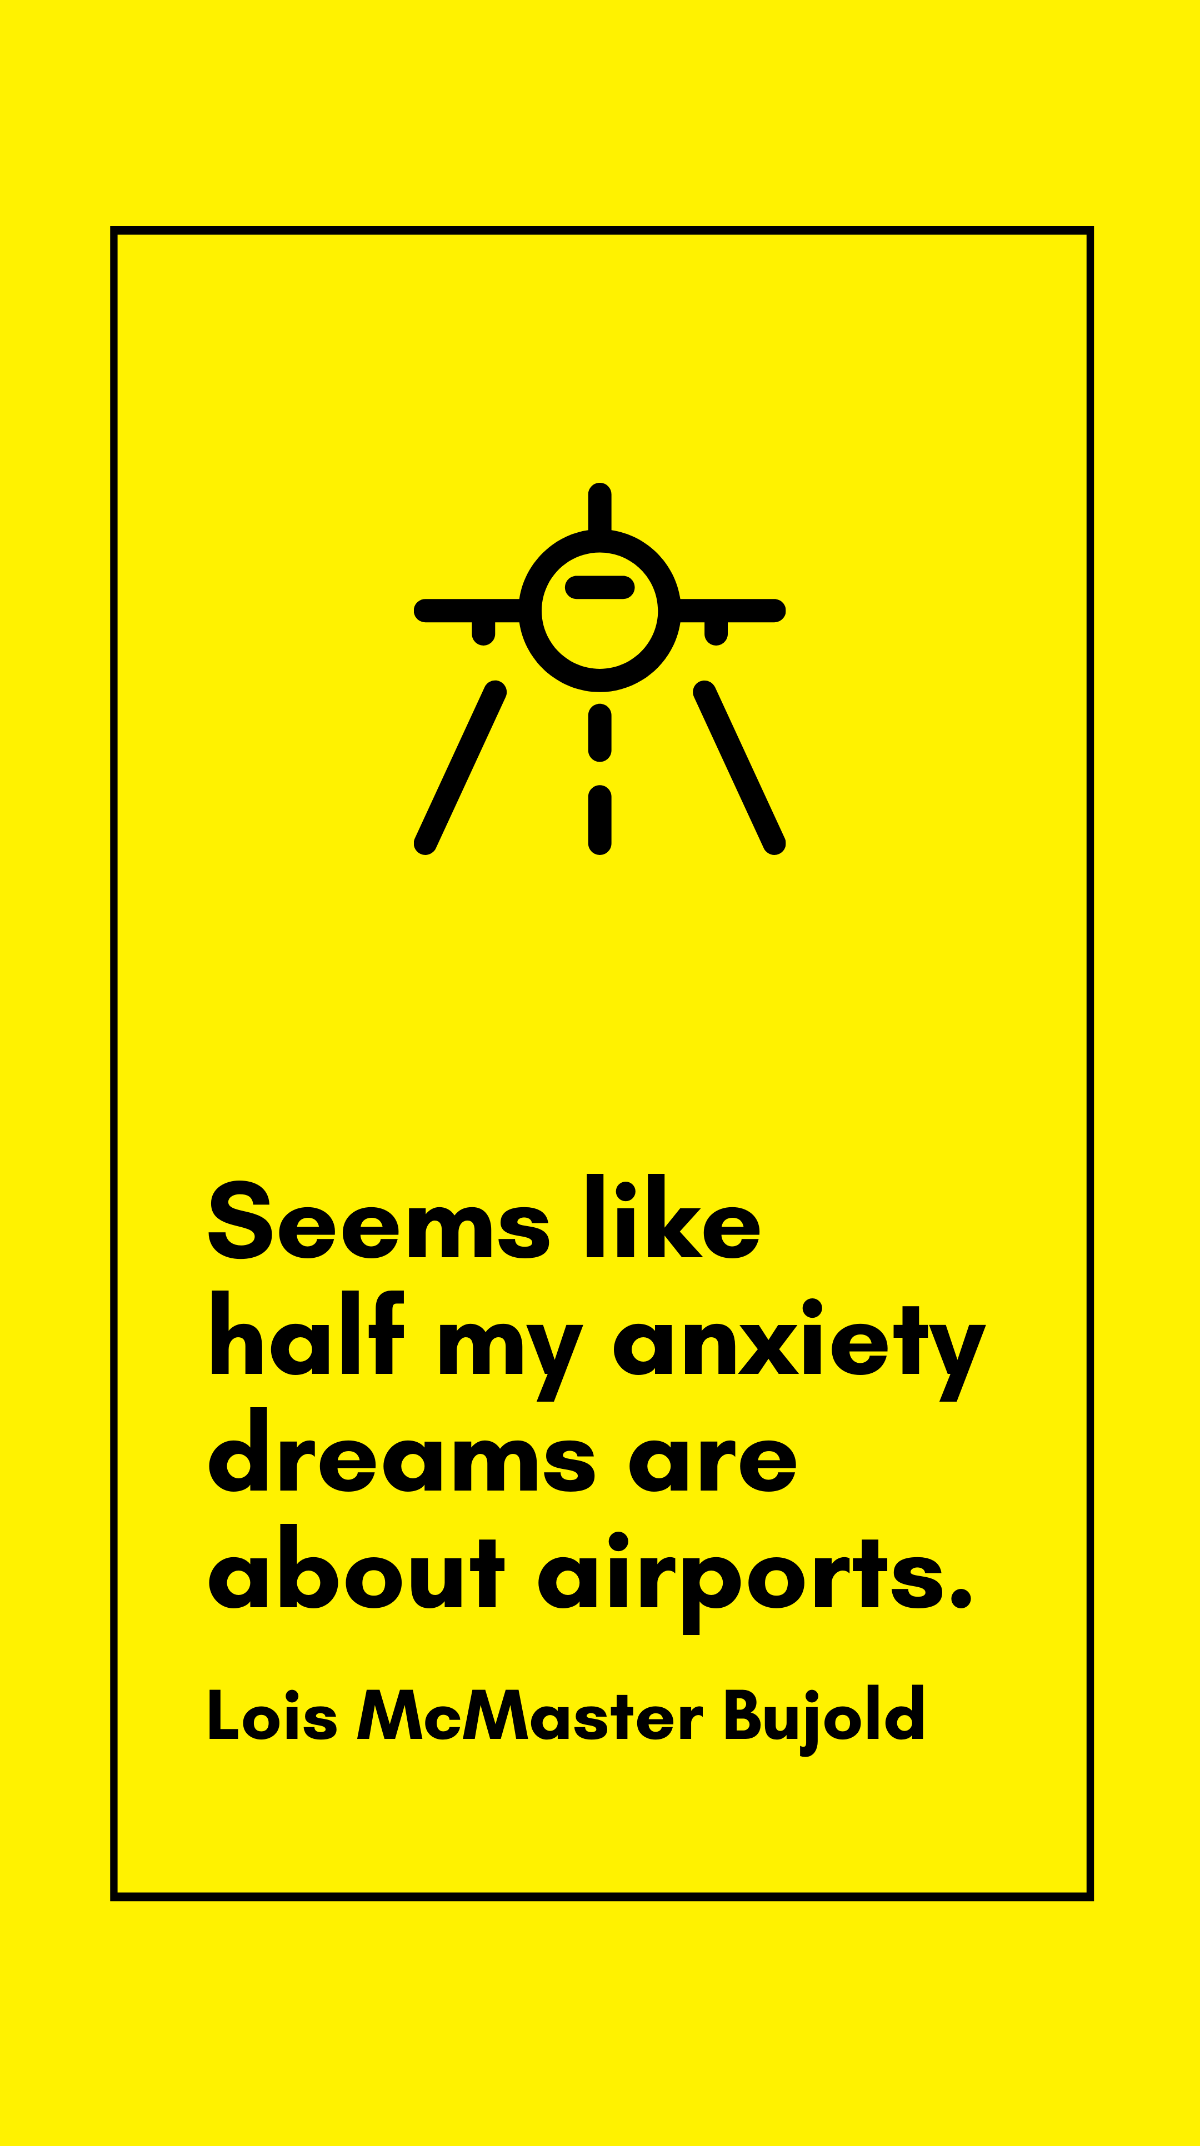 Lois McMaster Bujold - Seems like half my anxiety dreams are about airports.